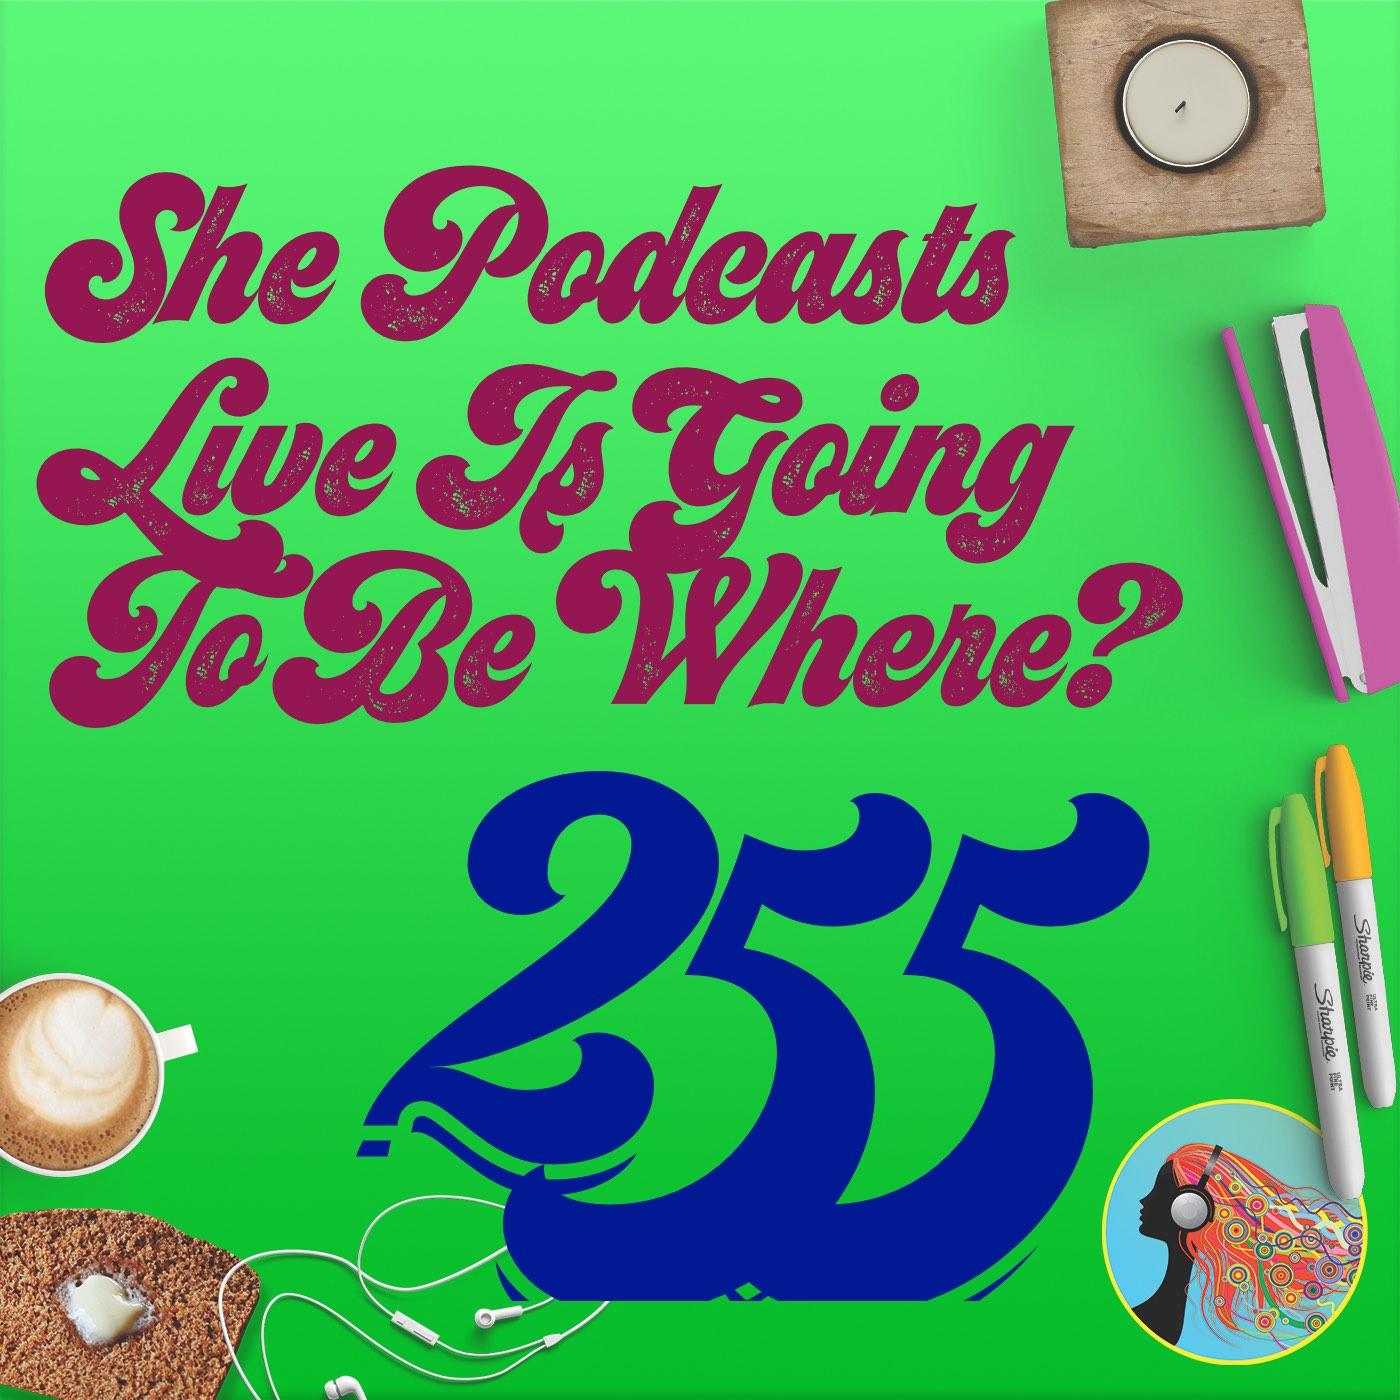 255 She Podcasts Live Is Going To Be Where?